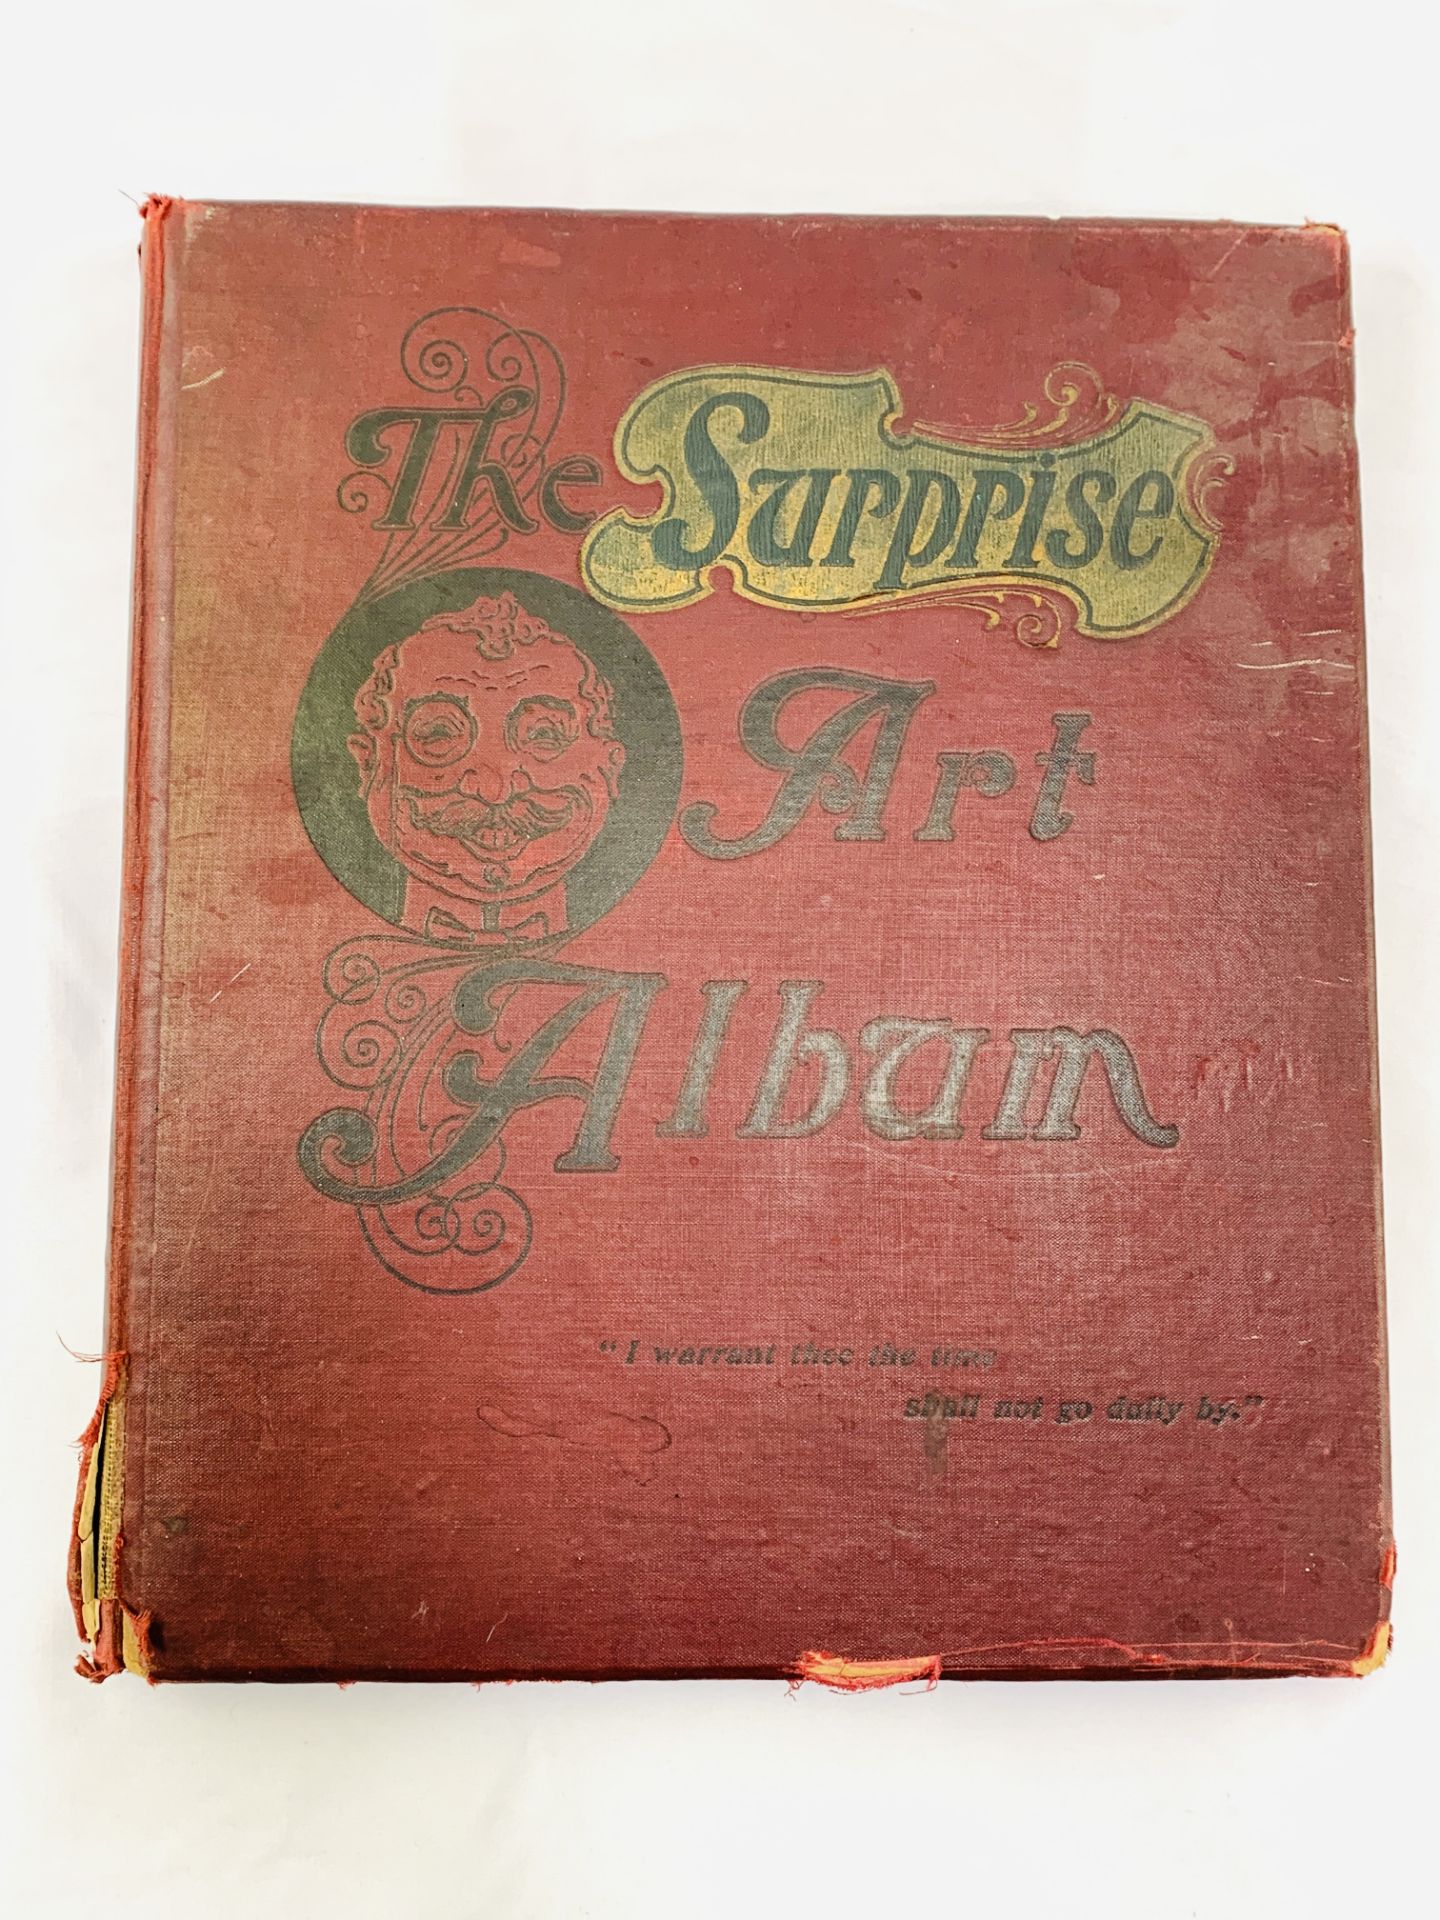 The Surprise Art Album, 2nd edition, by W. H. Soulby